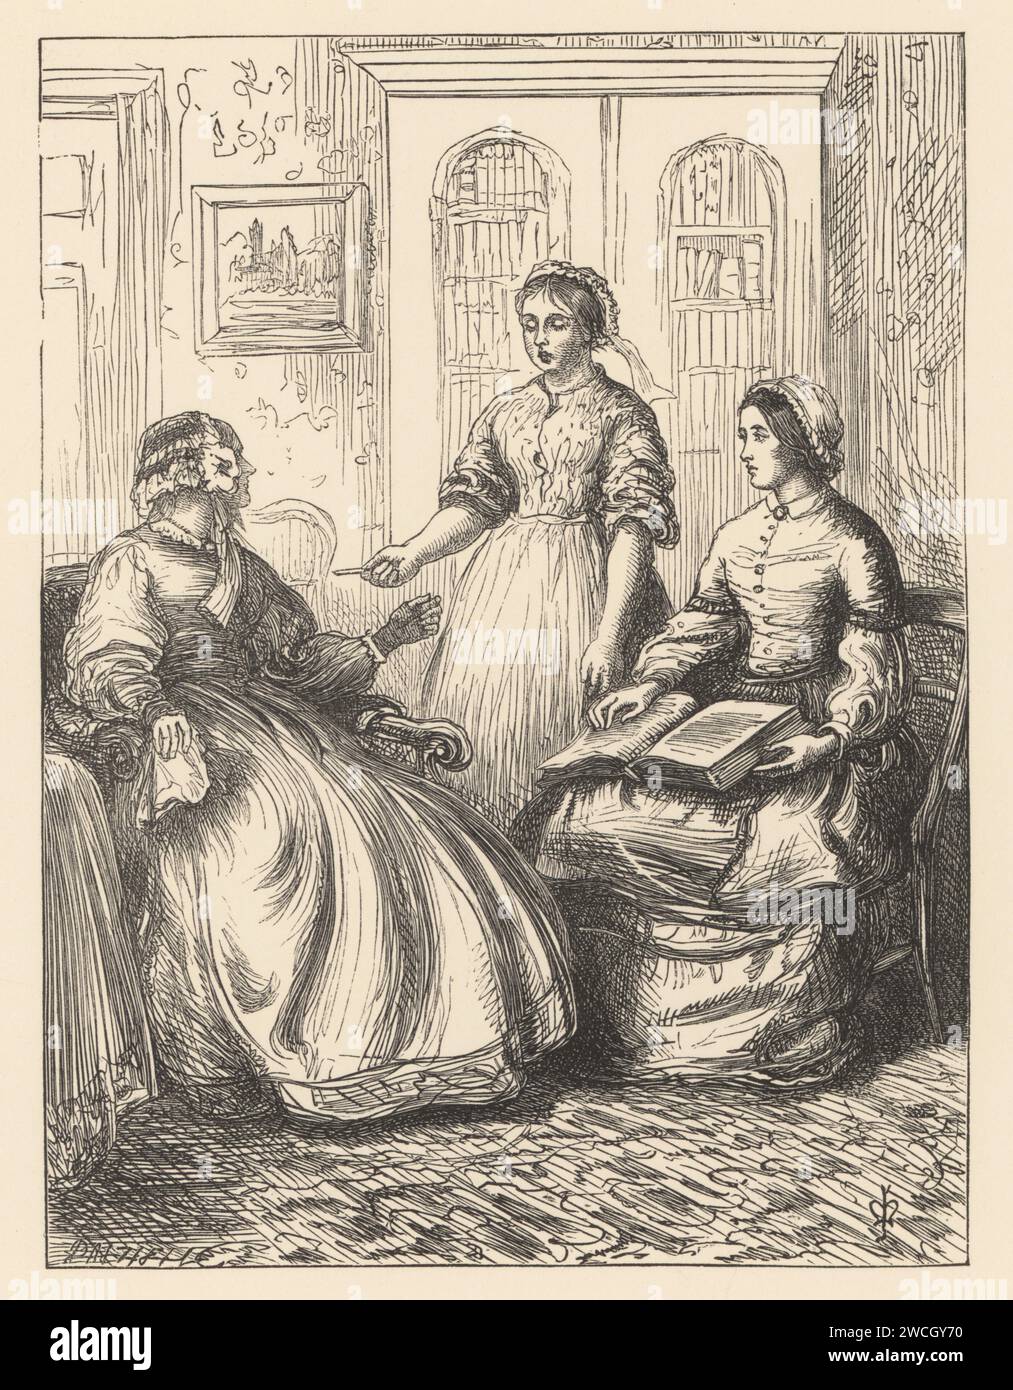 A maid shows a calling card to a woman in a Victorian drawing room. Another guest reads a book in front of a bookcase. A Visitor Announced, from Good Words. Woodcut by the Dalziel brothers after an illustration by Pre-Raphaelite artist John Everett Millais from Millais’ Illustrations, a Collection of Drawings on Wood, Alexander Strahan, London, 1866. Stock Photo